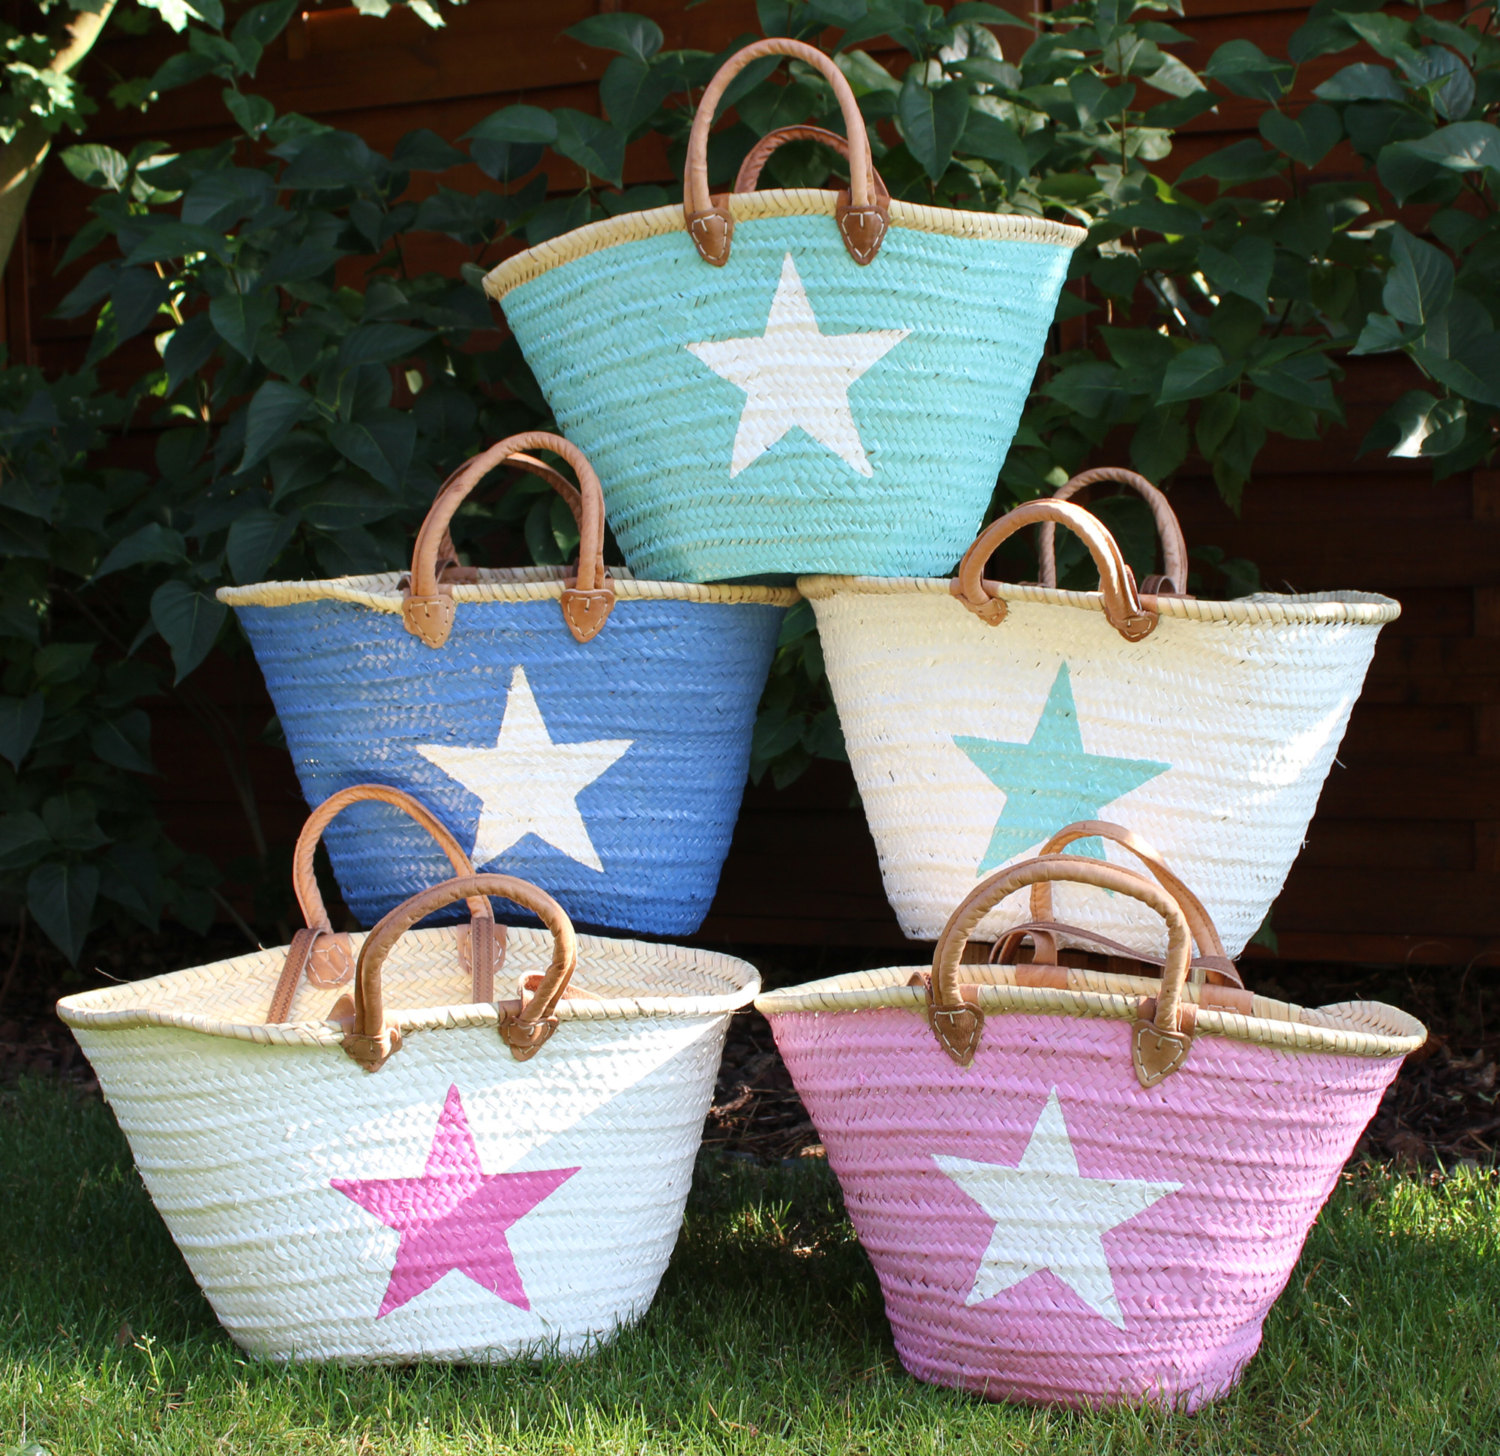 Say “Hello, Summer!” With These Cute Beach Bags